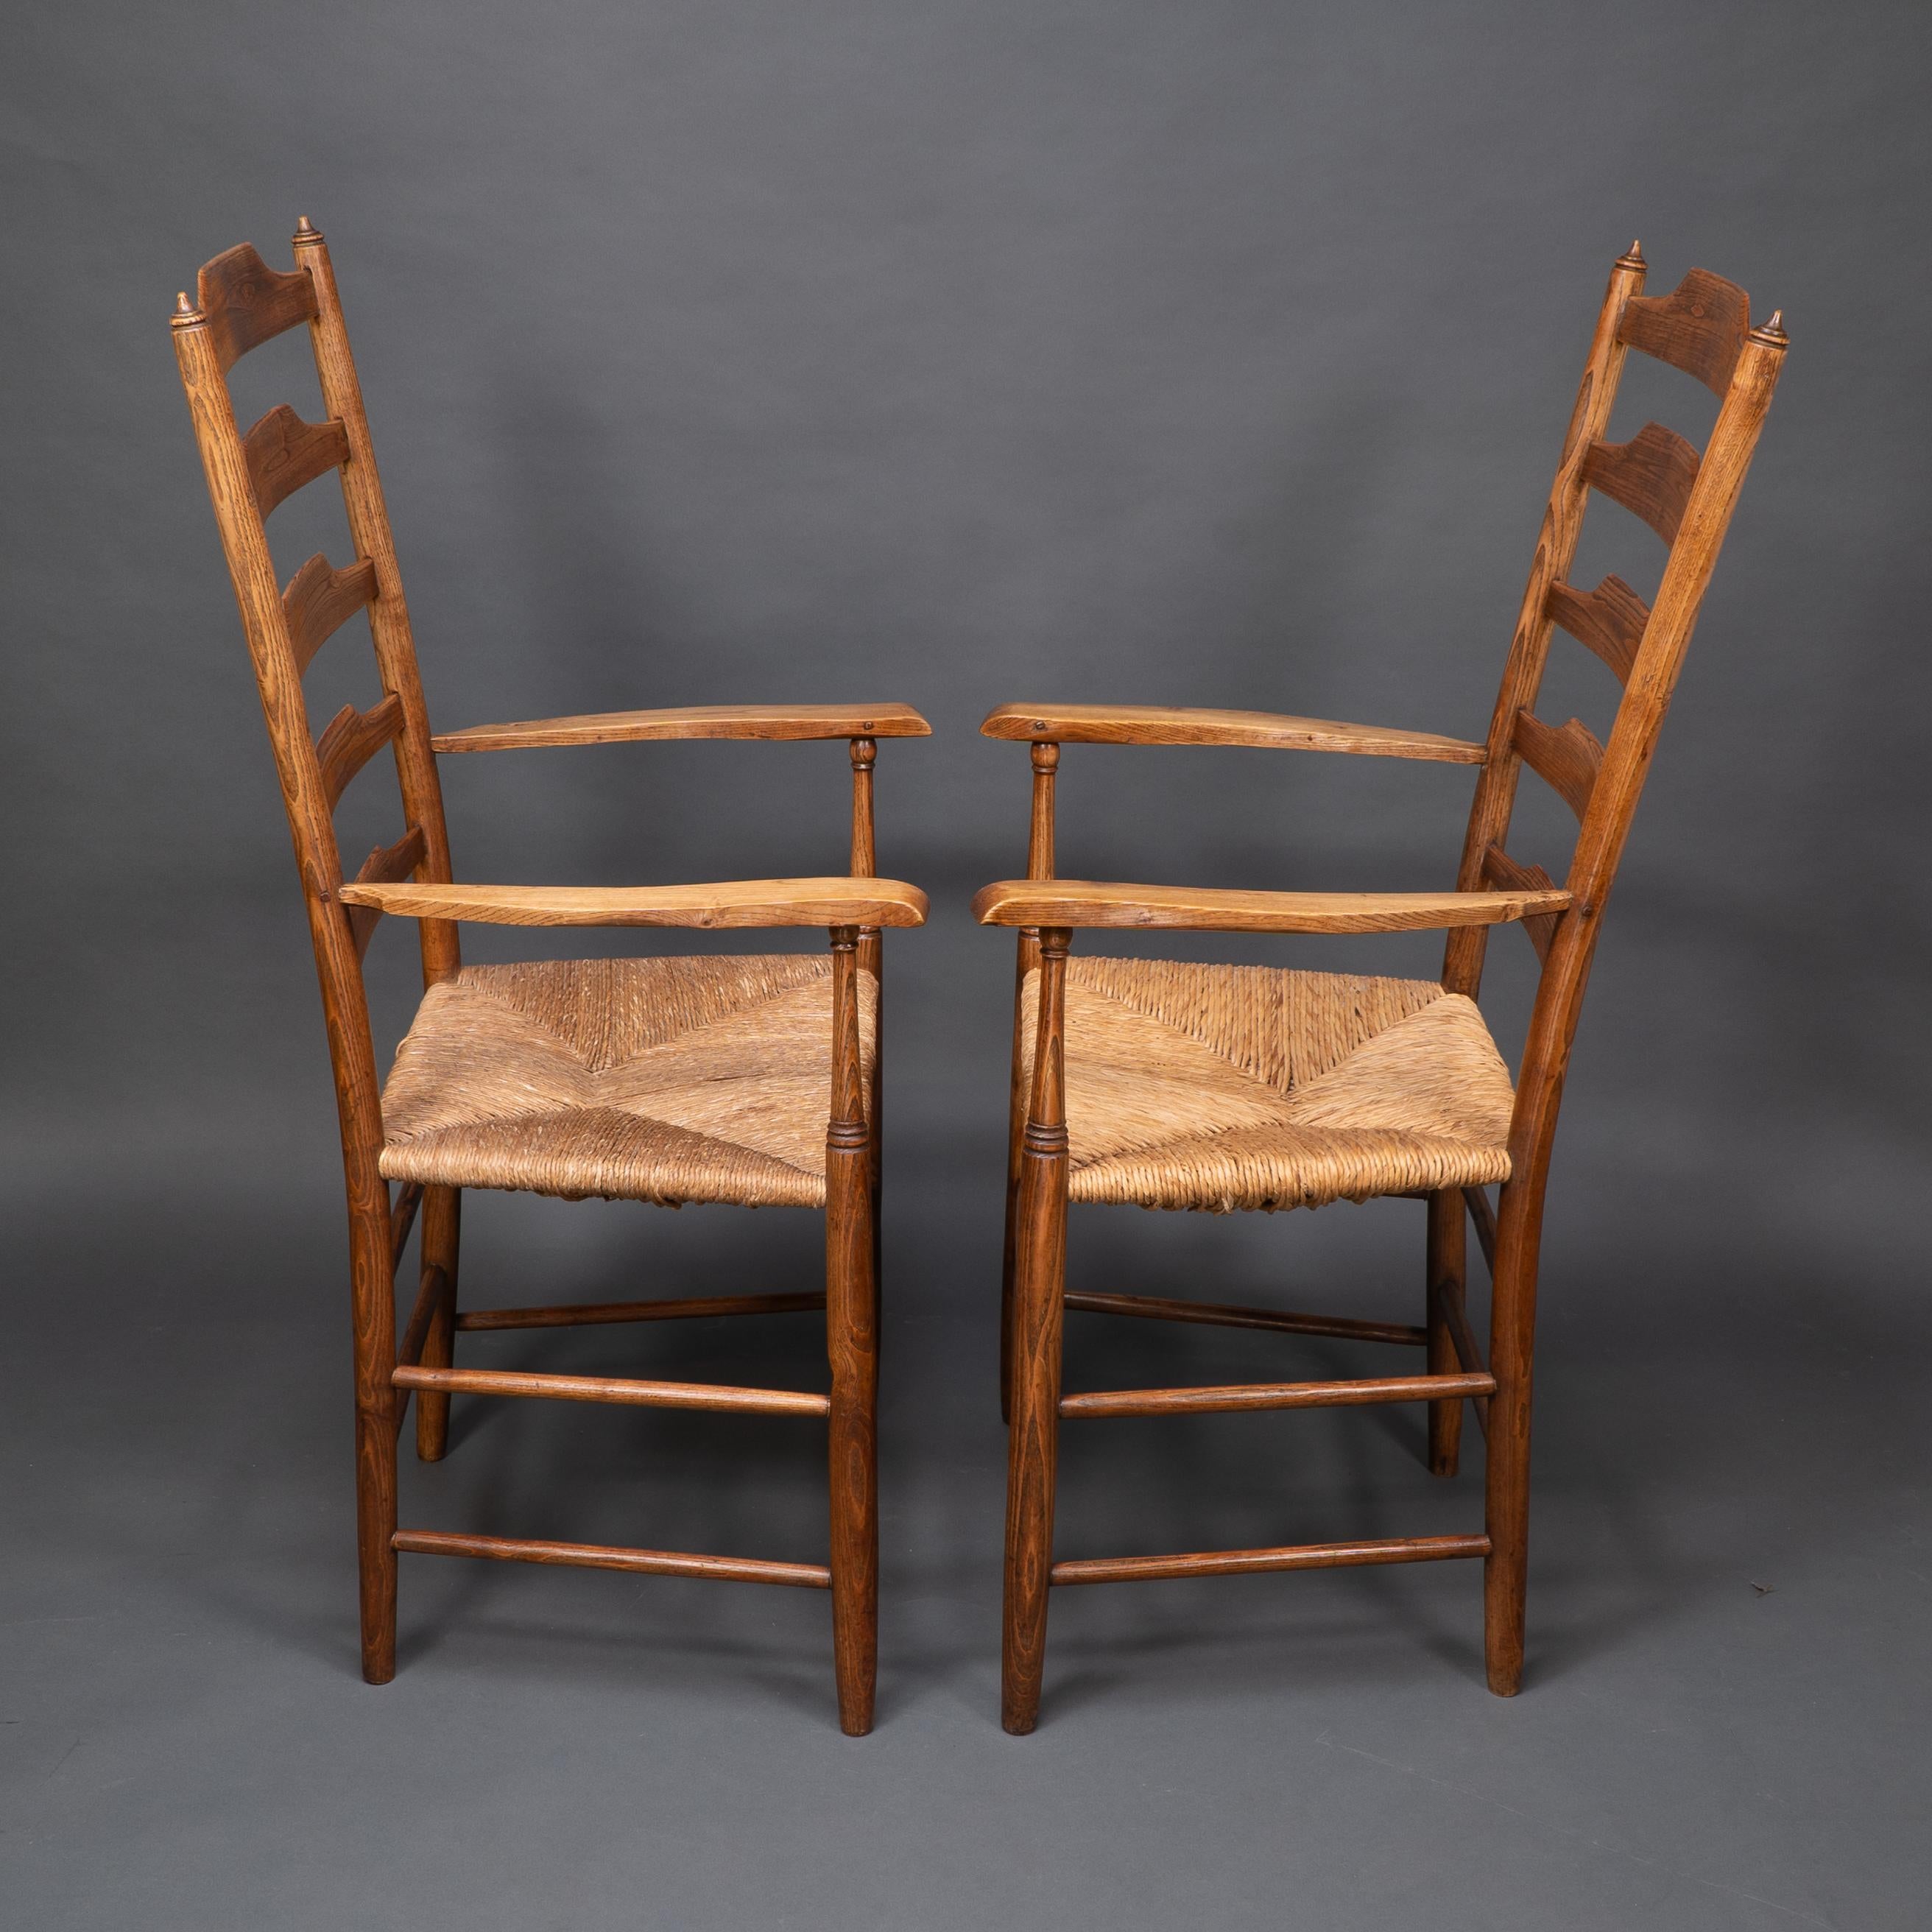 English Philip Clissett A fine set of four early Arts & Crafts ash ladder back armchairs For Sale